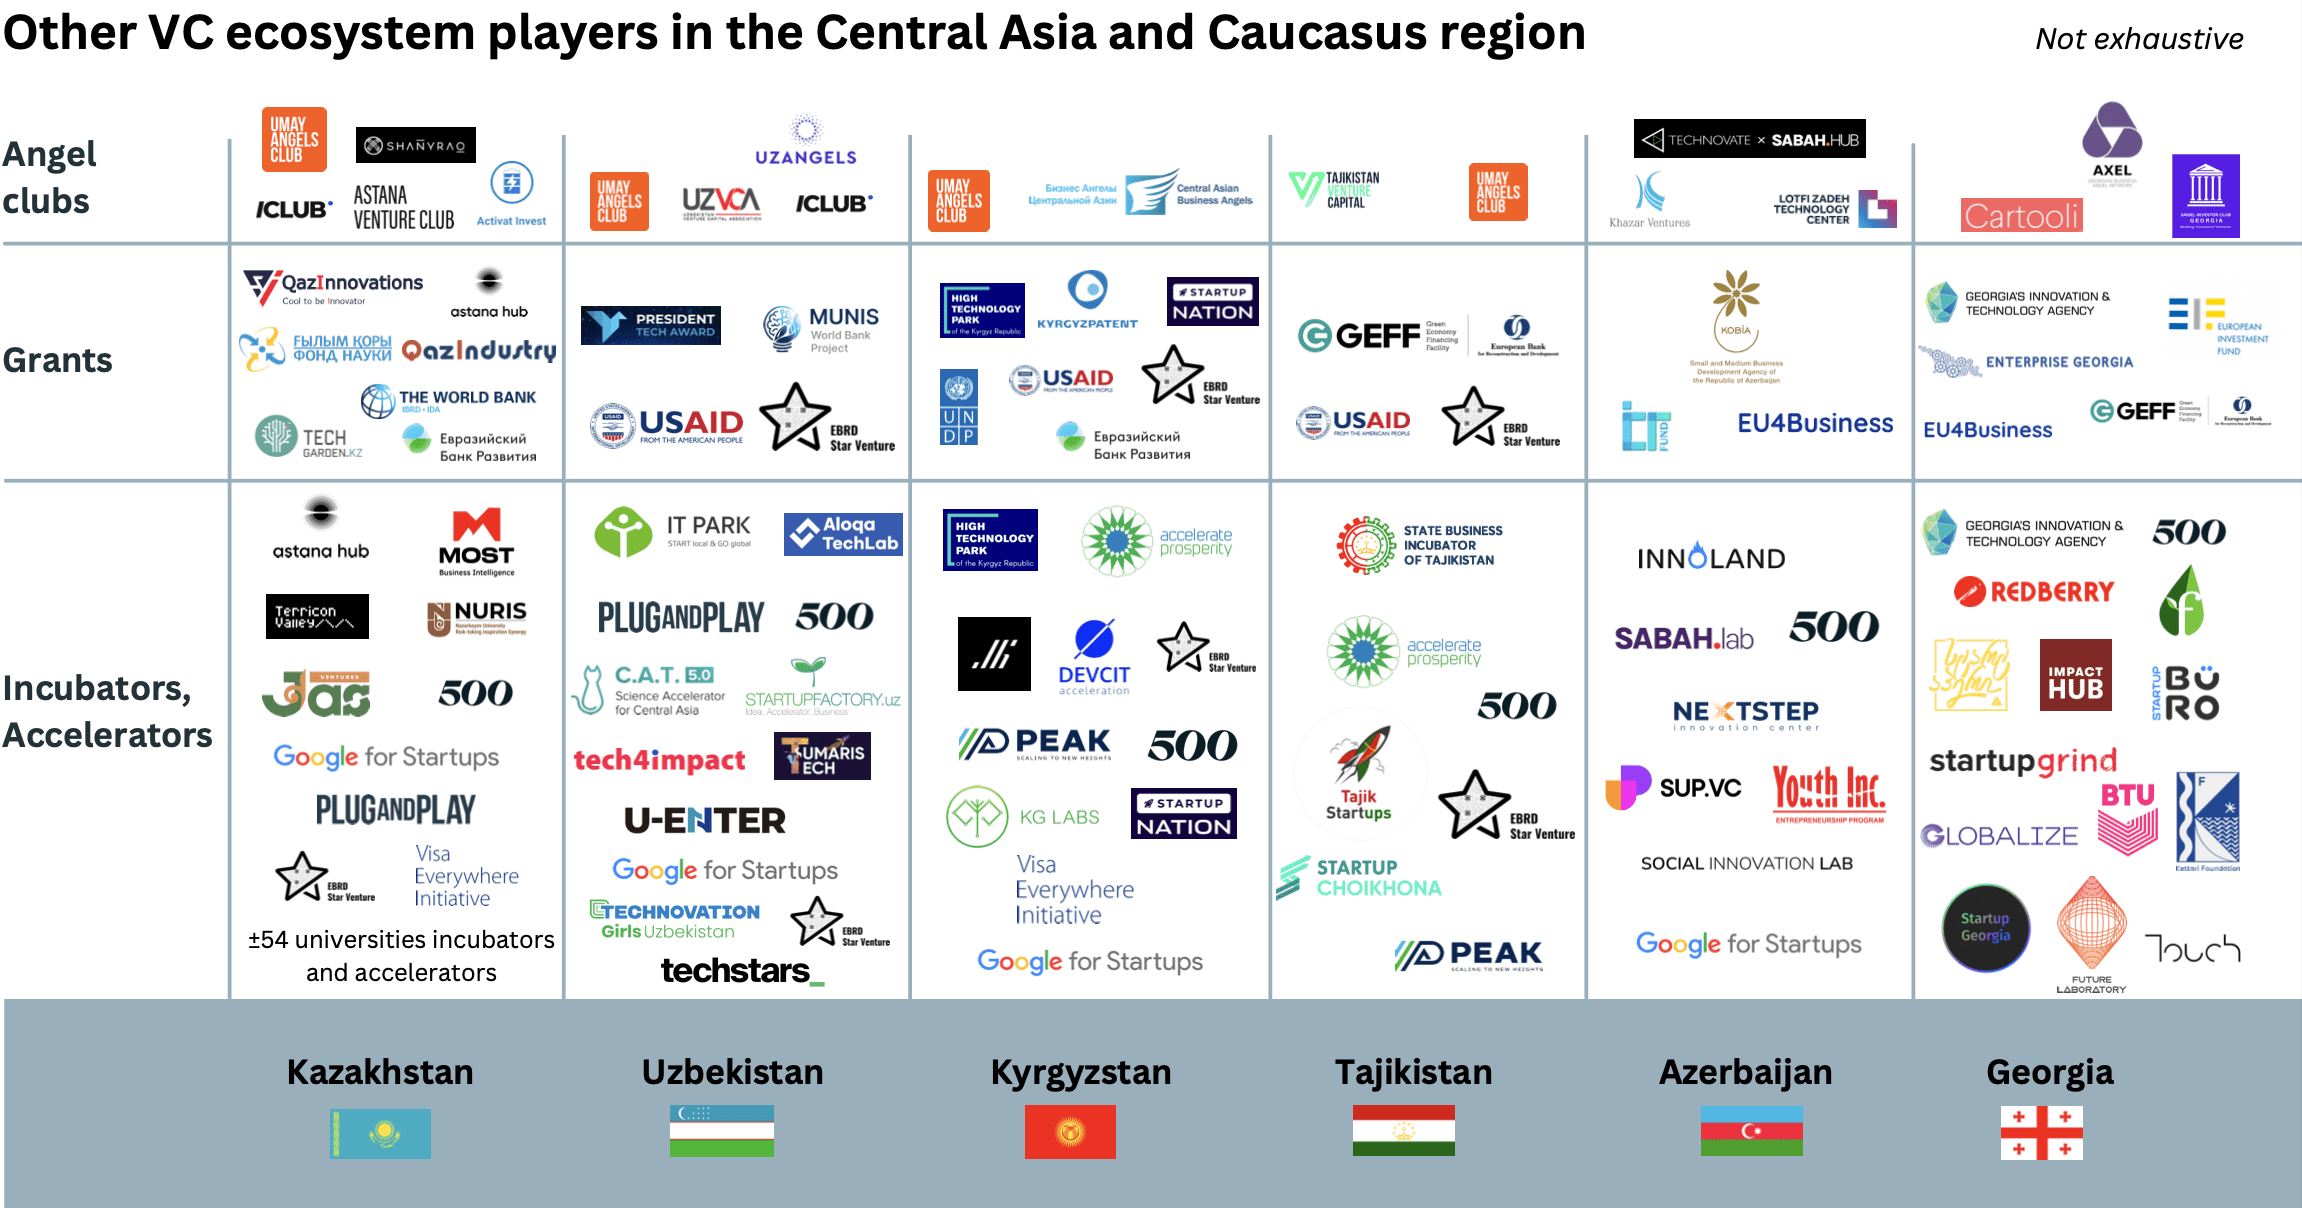 Other VC ecosystem players in the Central Asia and Caucasus region